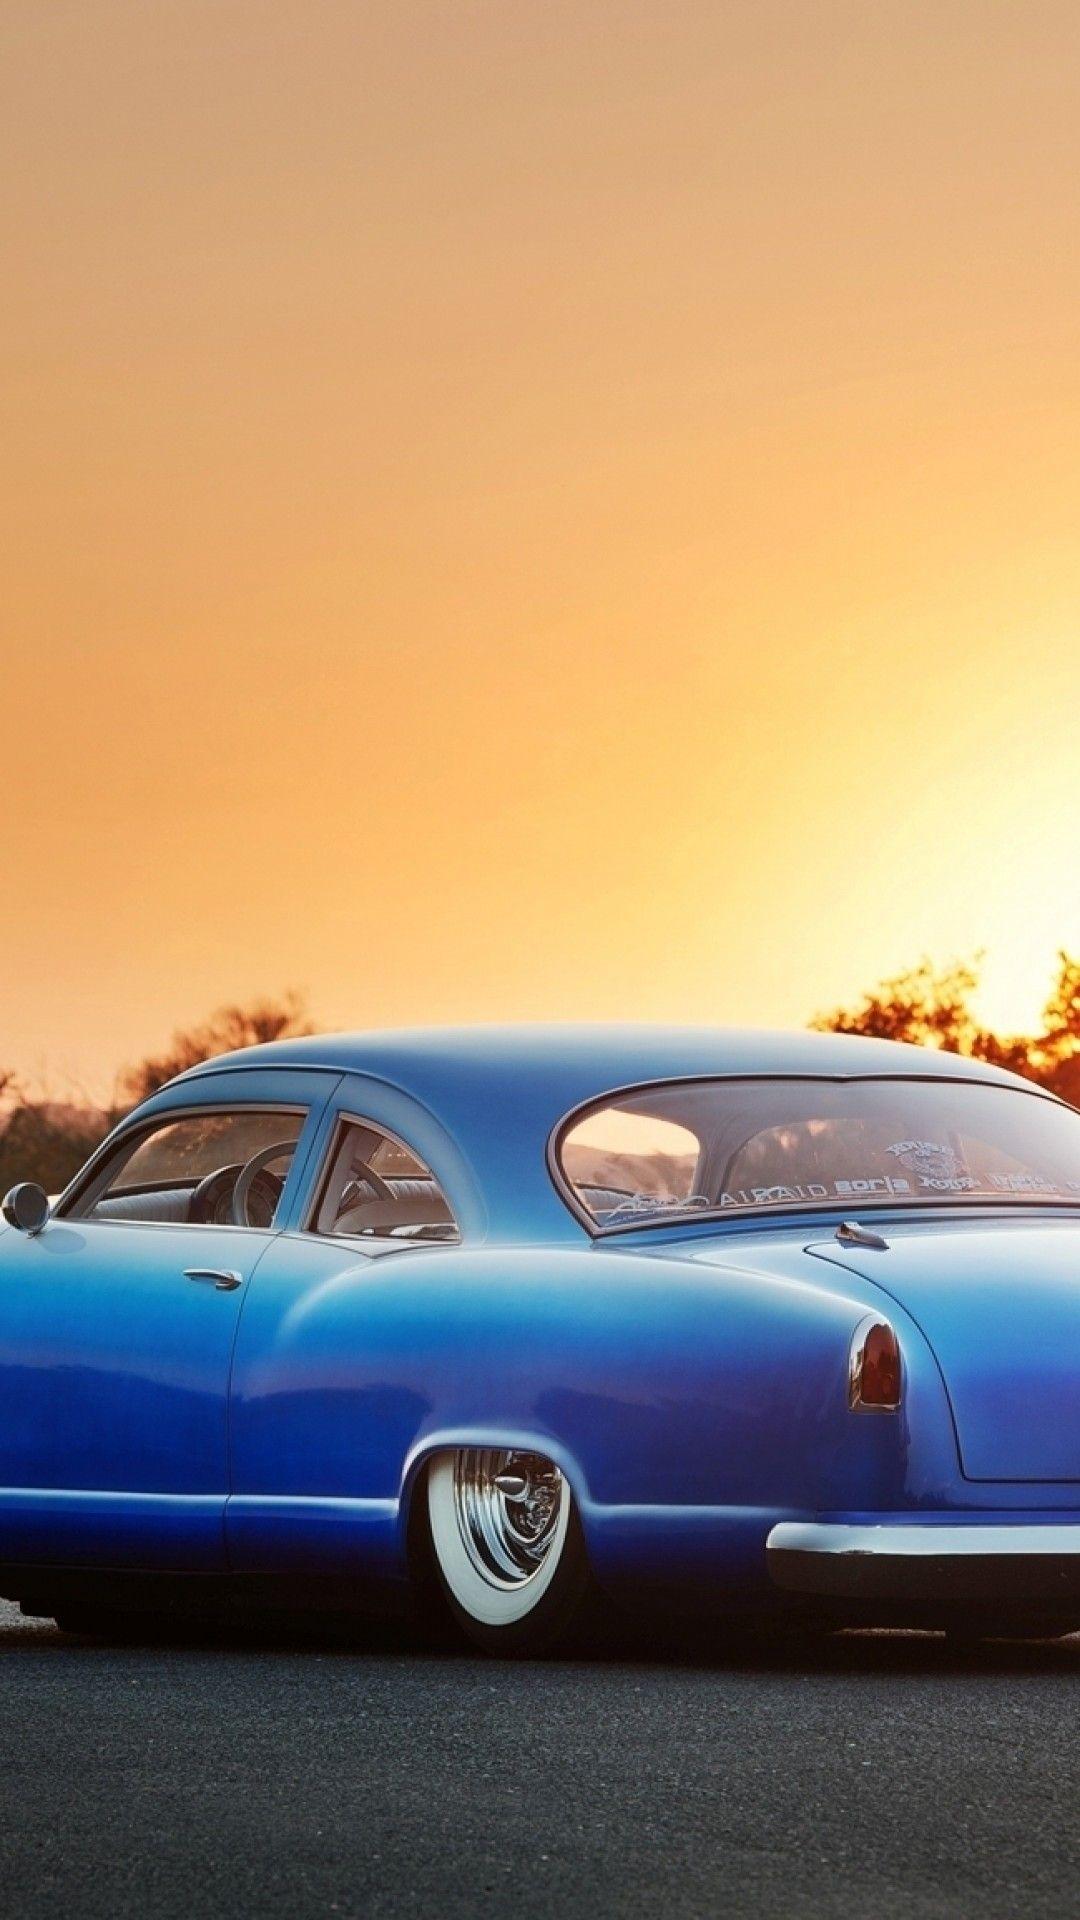 Download 1080x1920 Kaiser Lowrider, Blue, Sunset, Back View, Cars